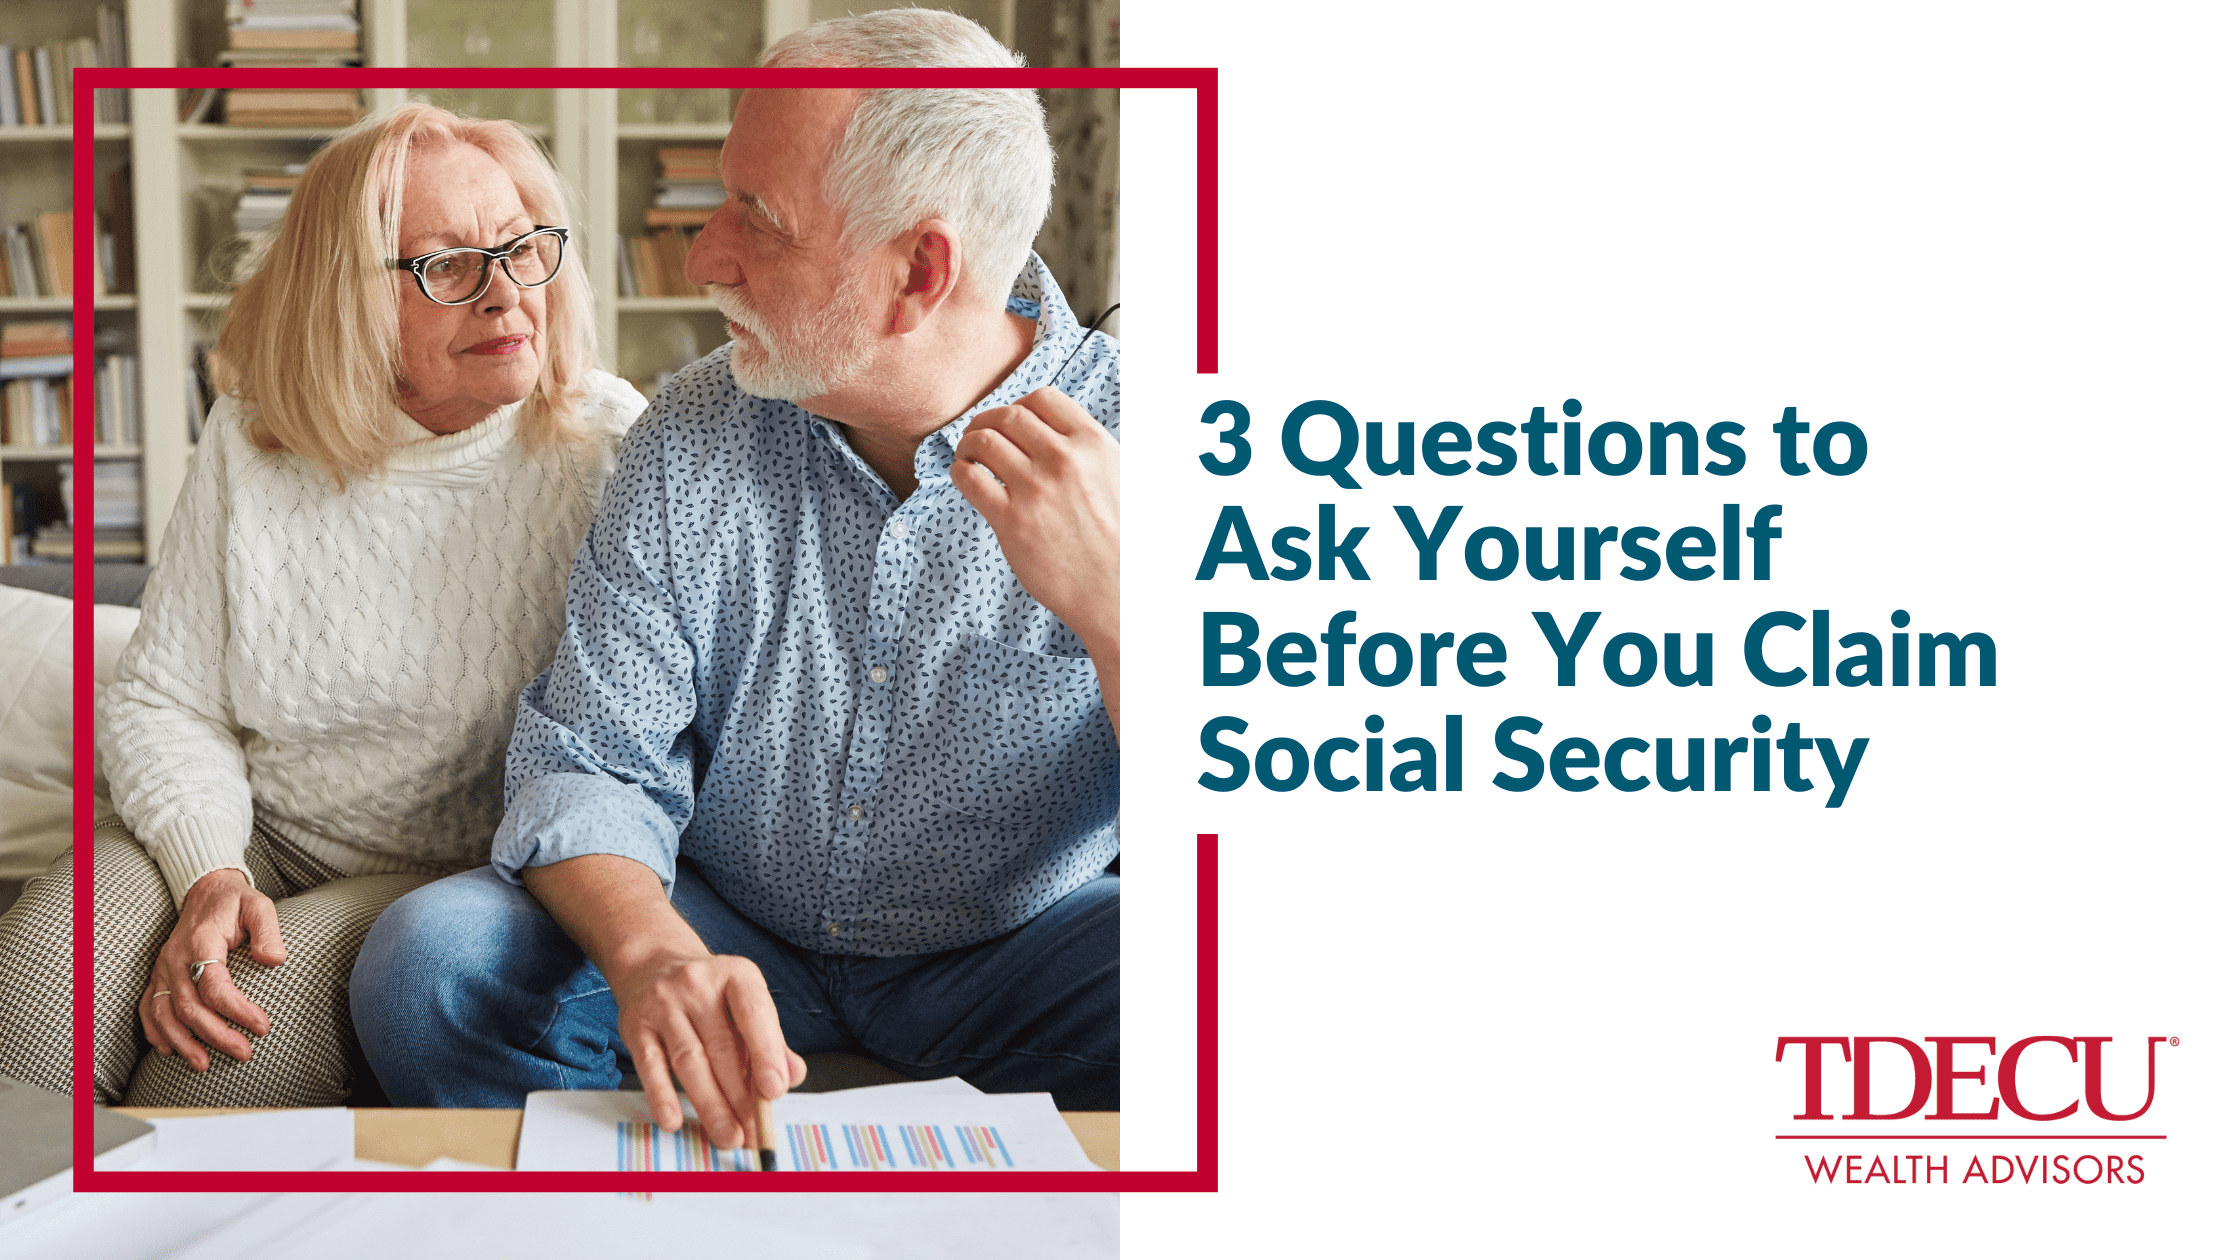 3 Questions to Ask Yourself Before You Claim Social Security